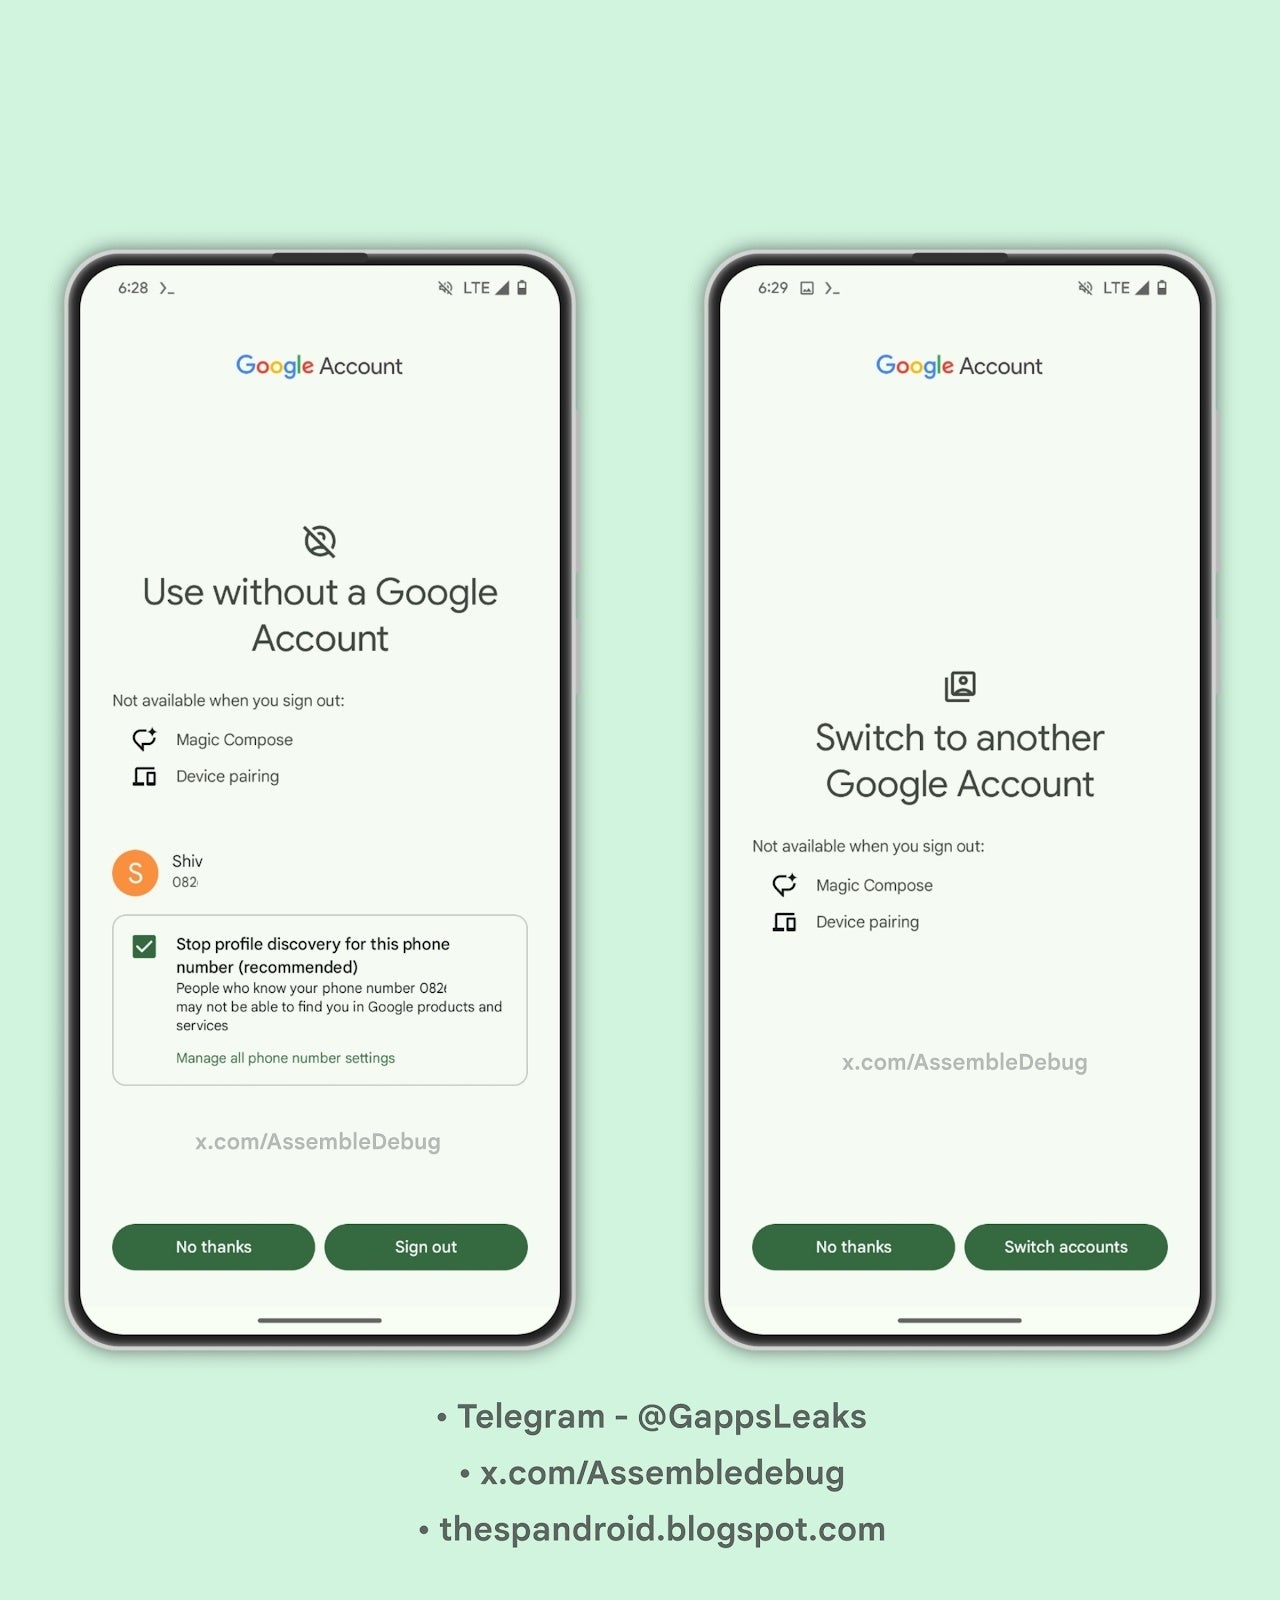 Google Messages tests warning about loss of functionality when logging out or switching accounts